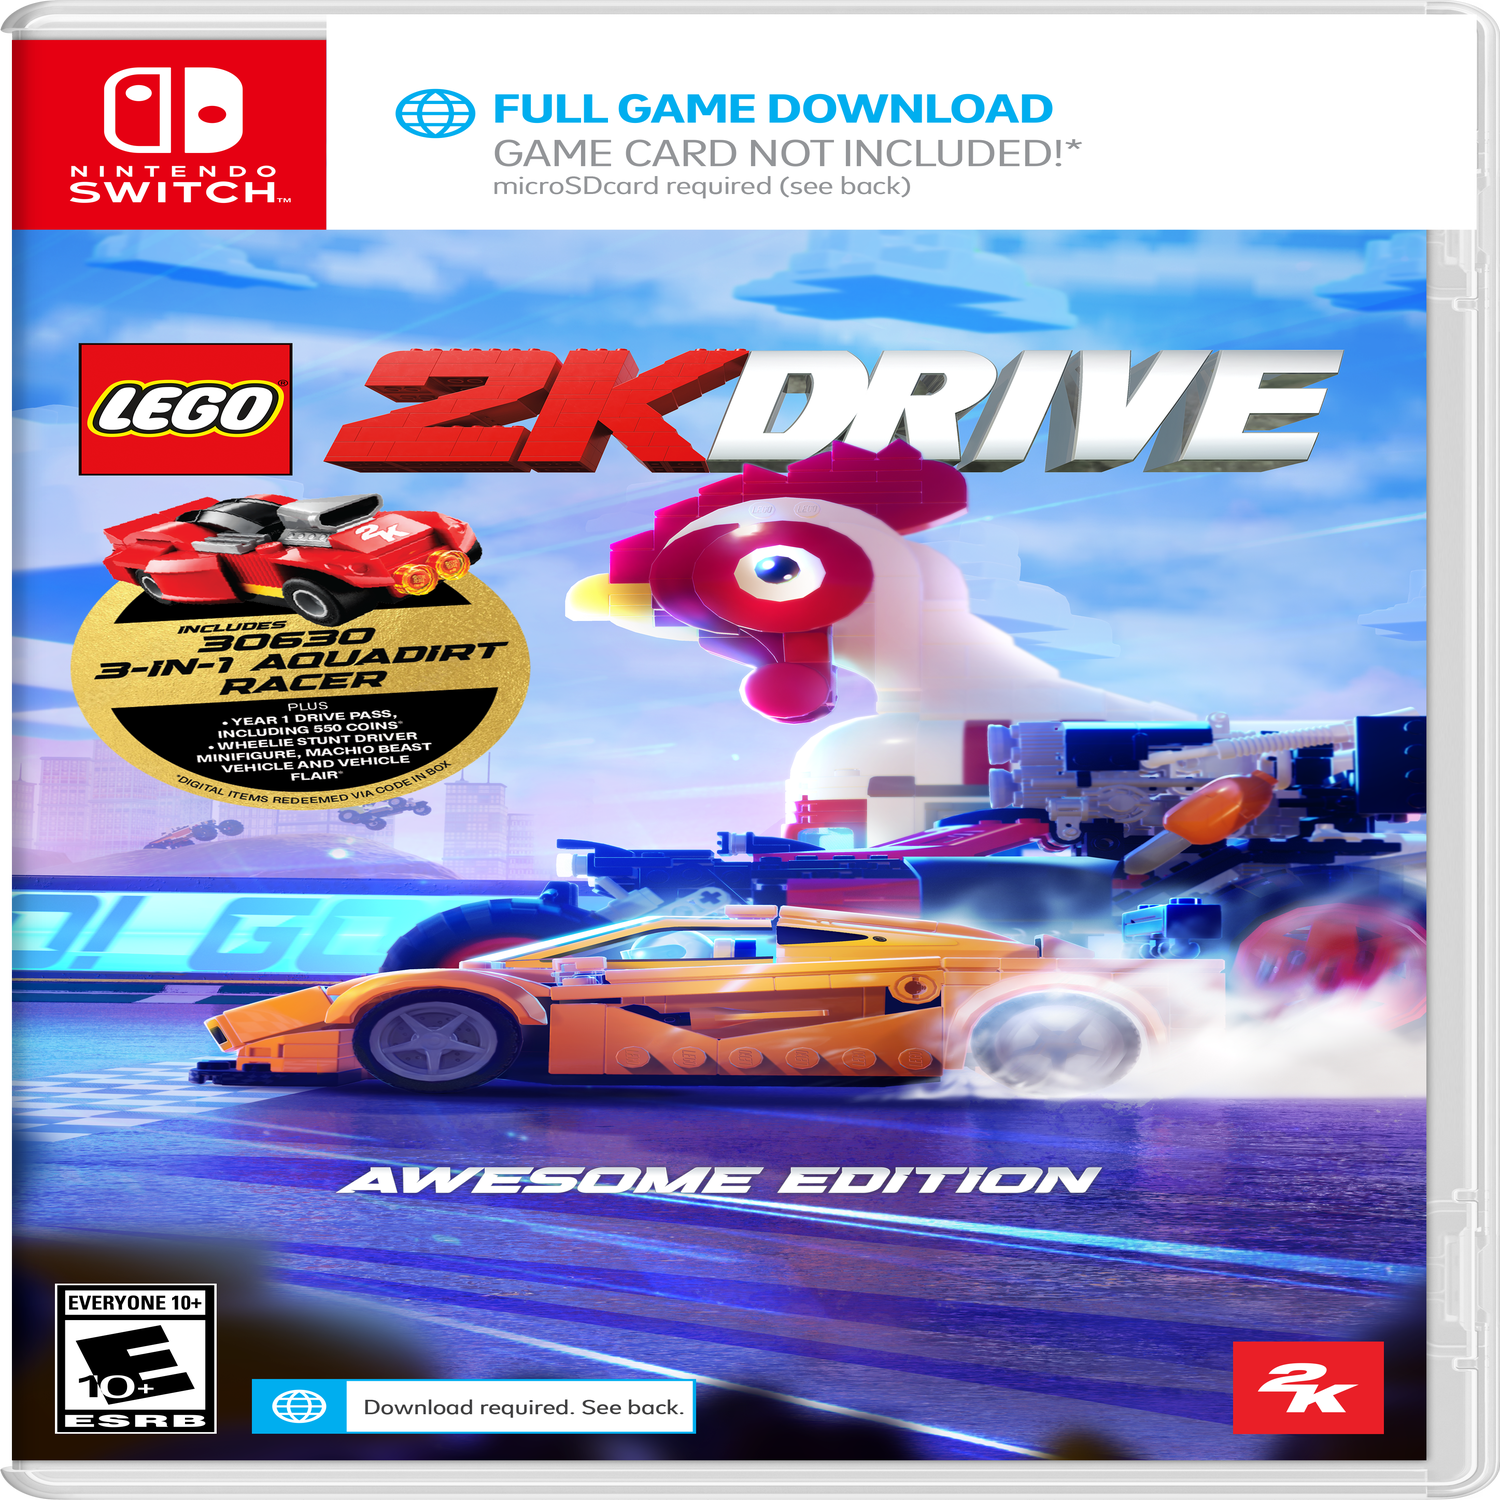 LEGO 2K Drive  The Official Website